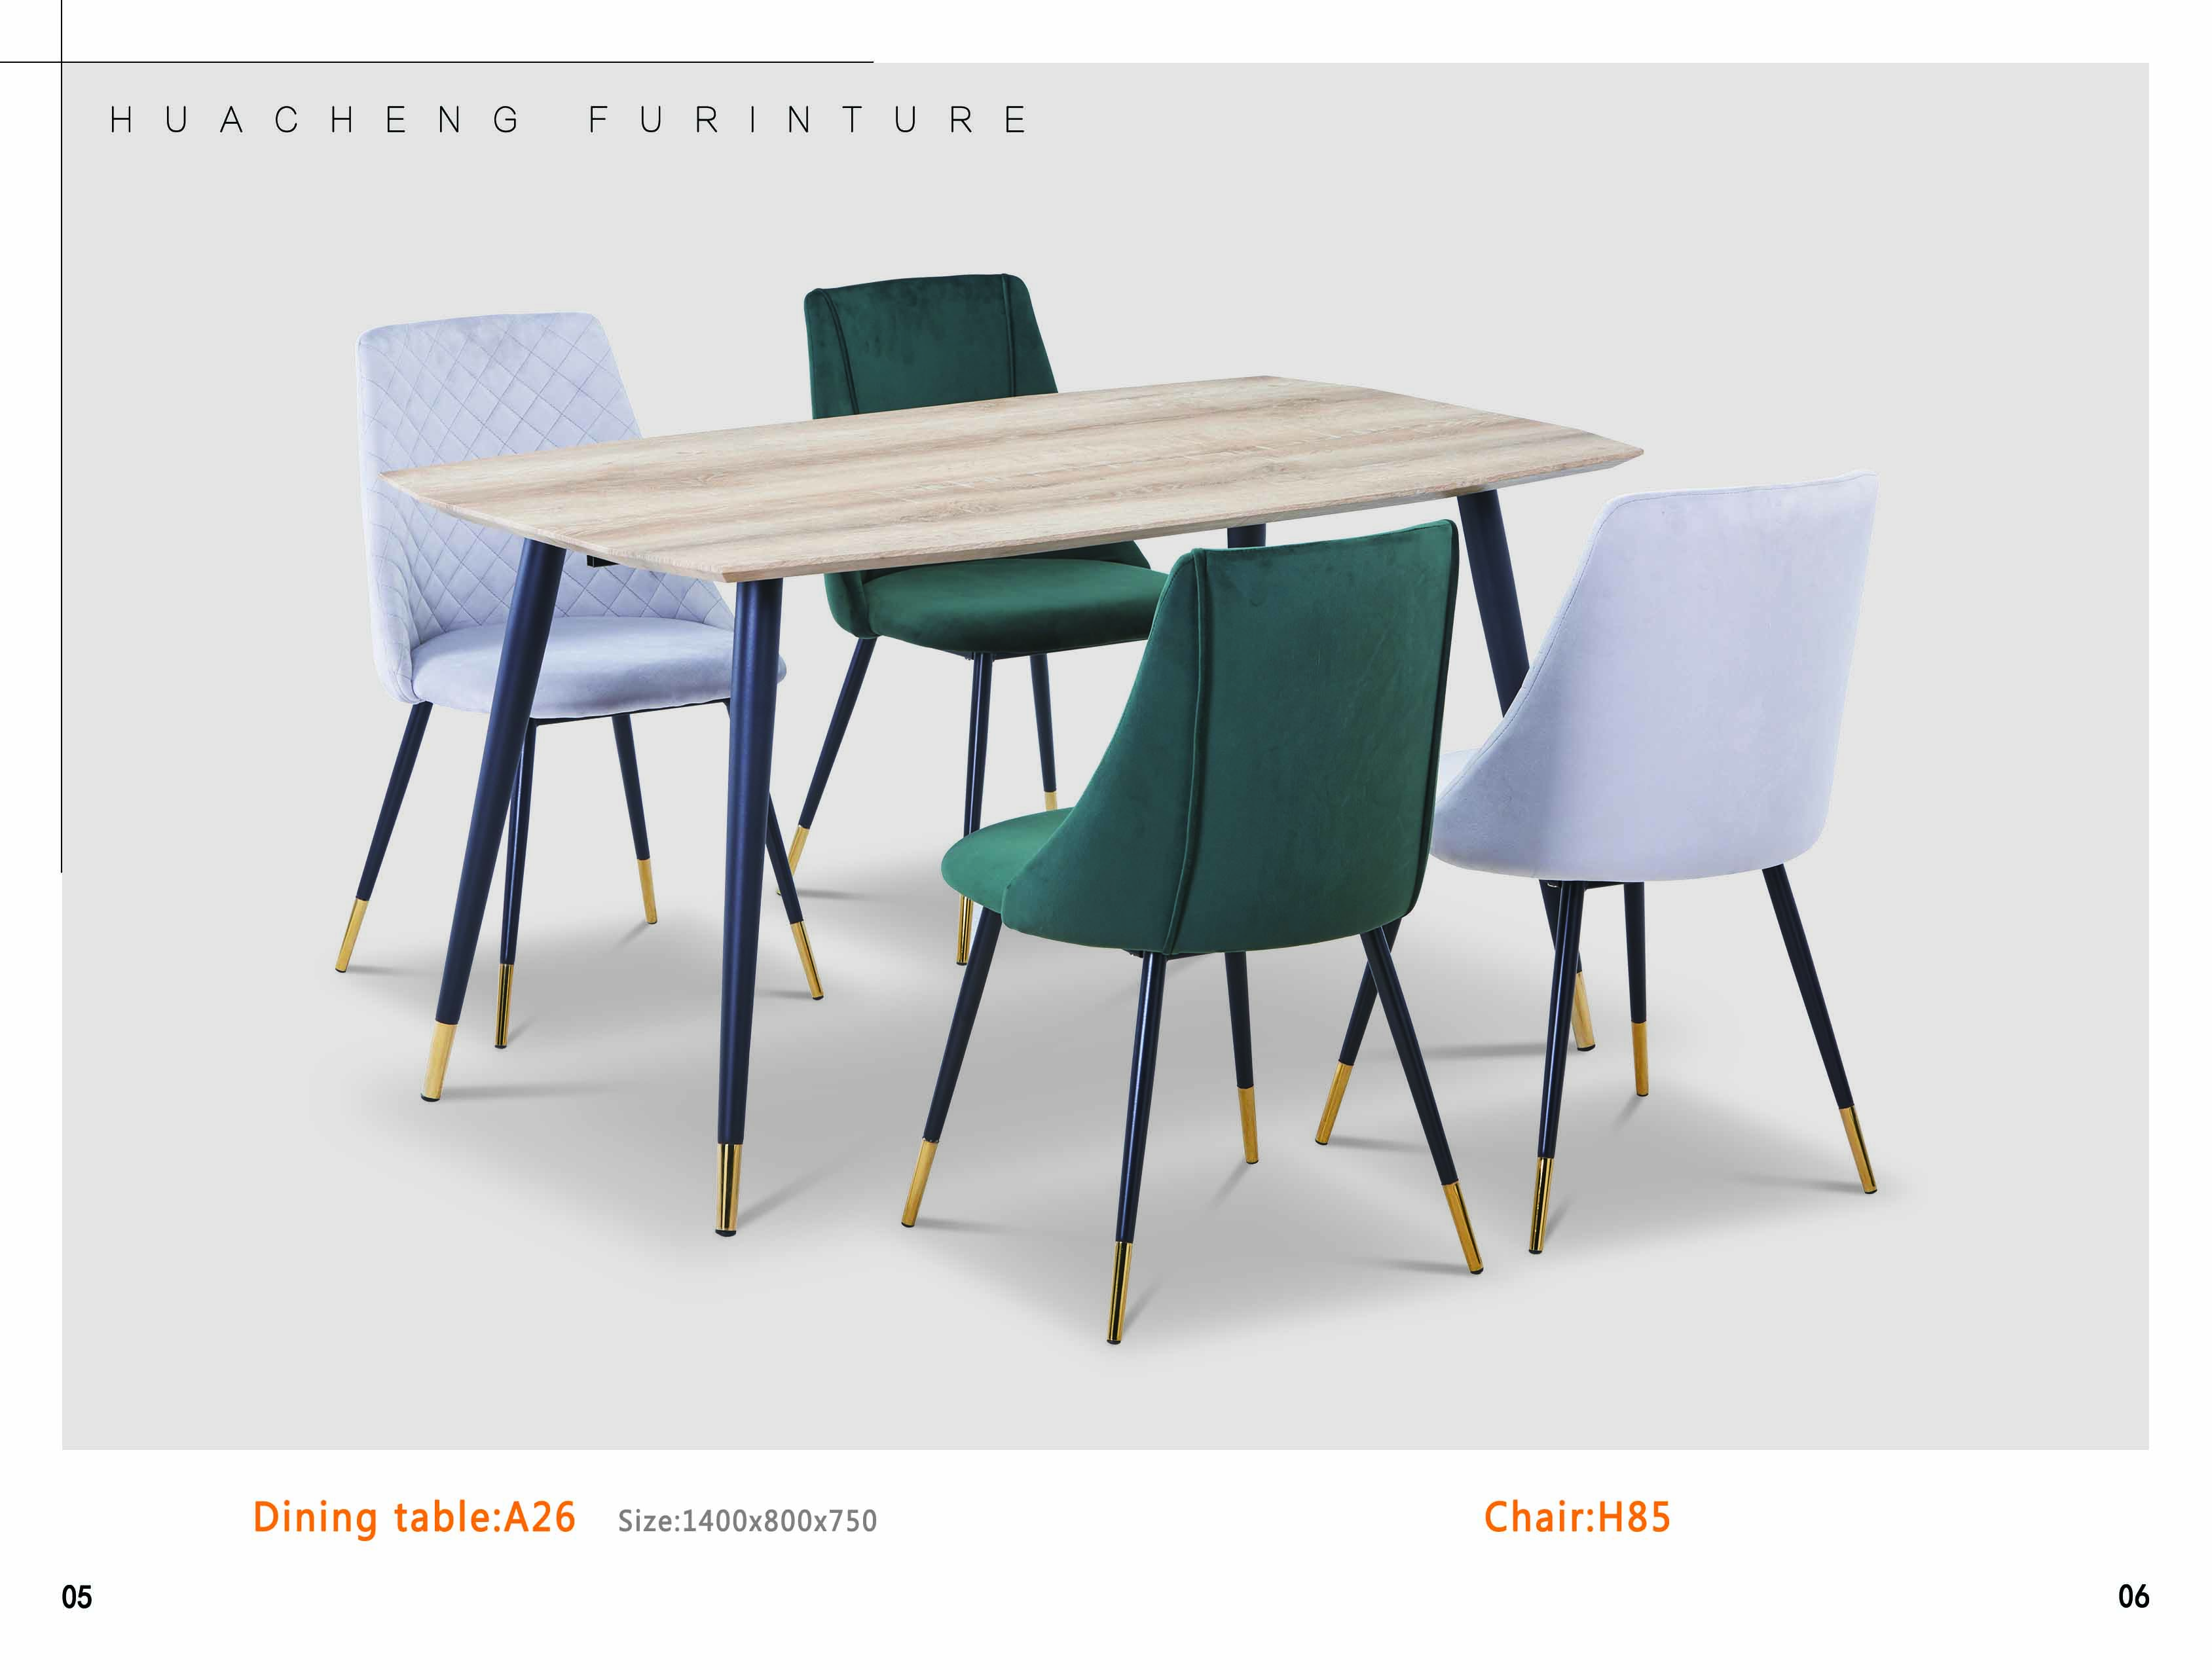 MDF Dining Table and PU/Fabric Chairs A26 H85